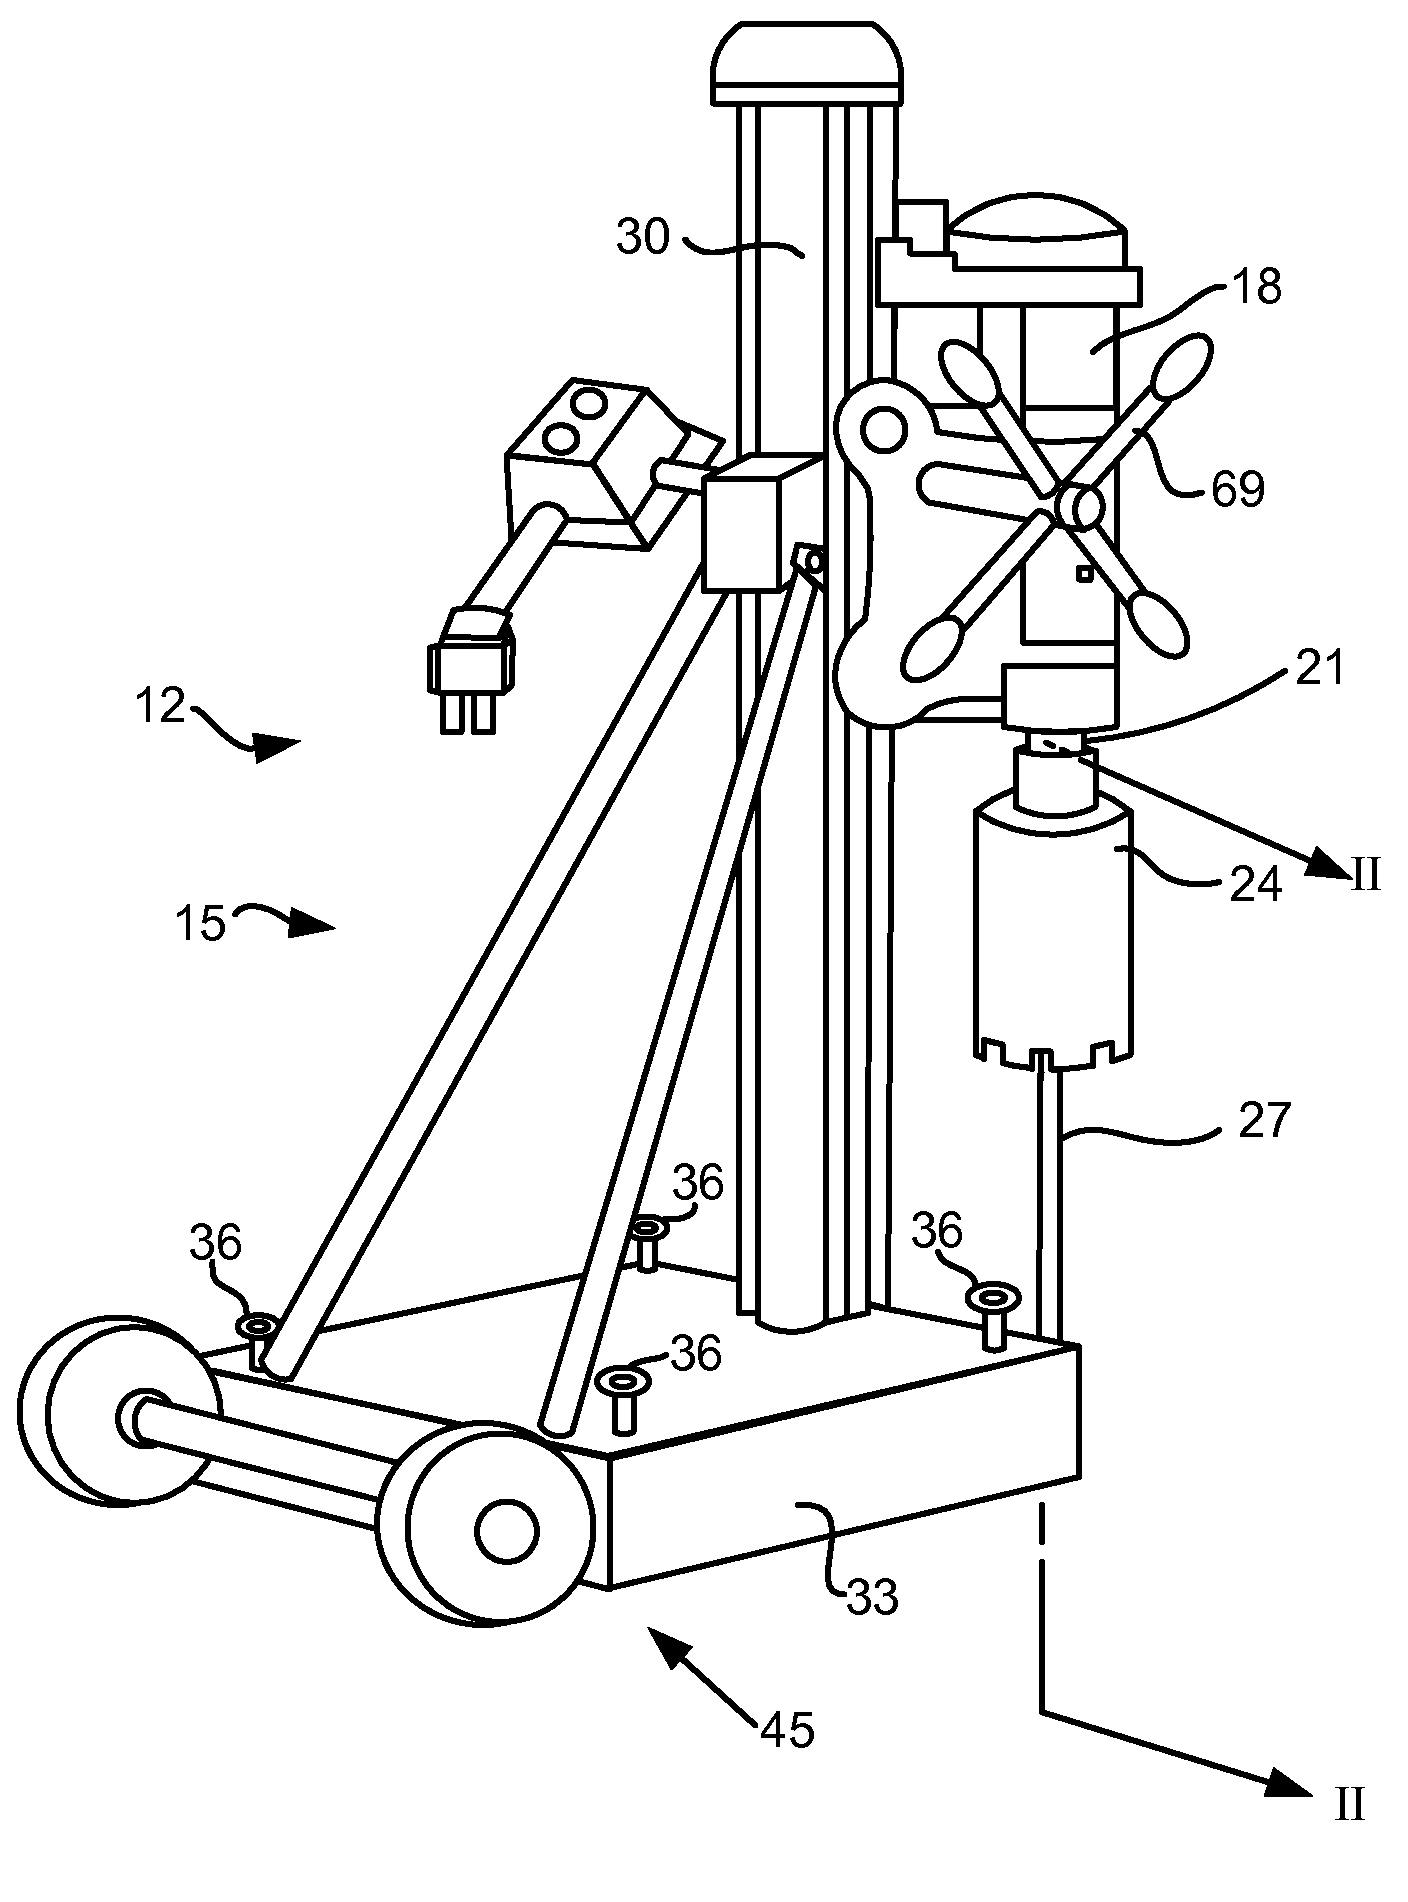 Apparatus, system, and method for catching a core